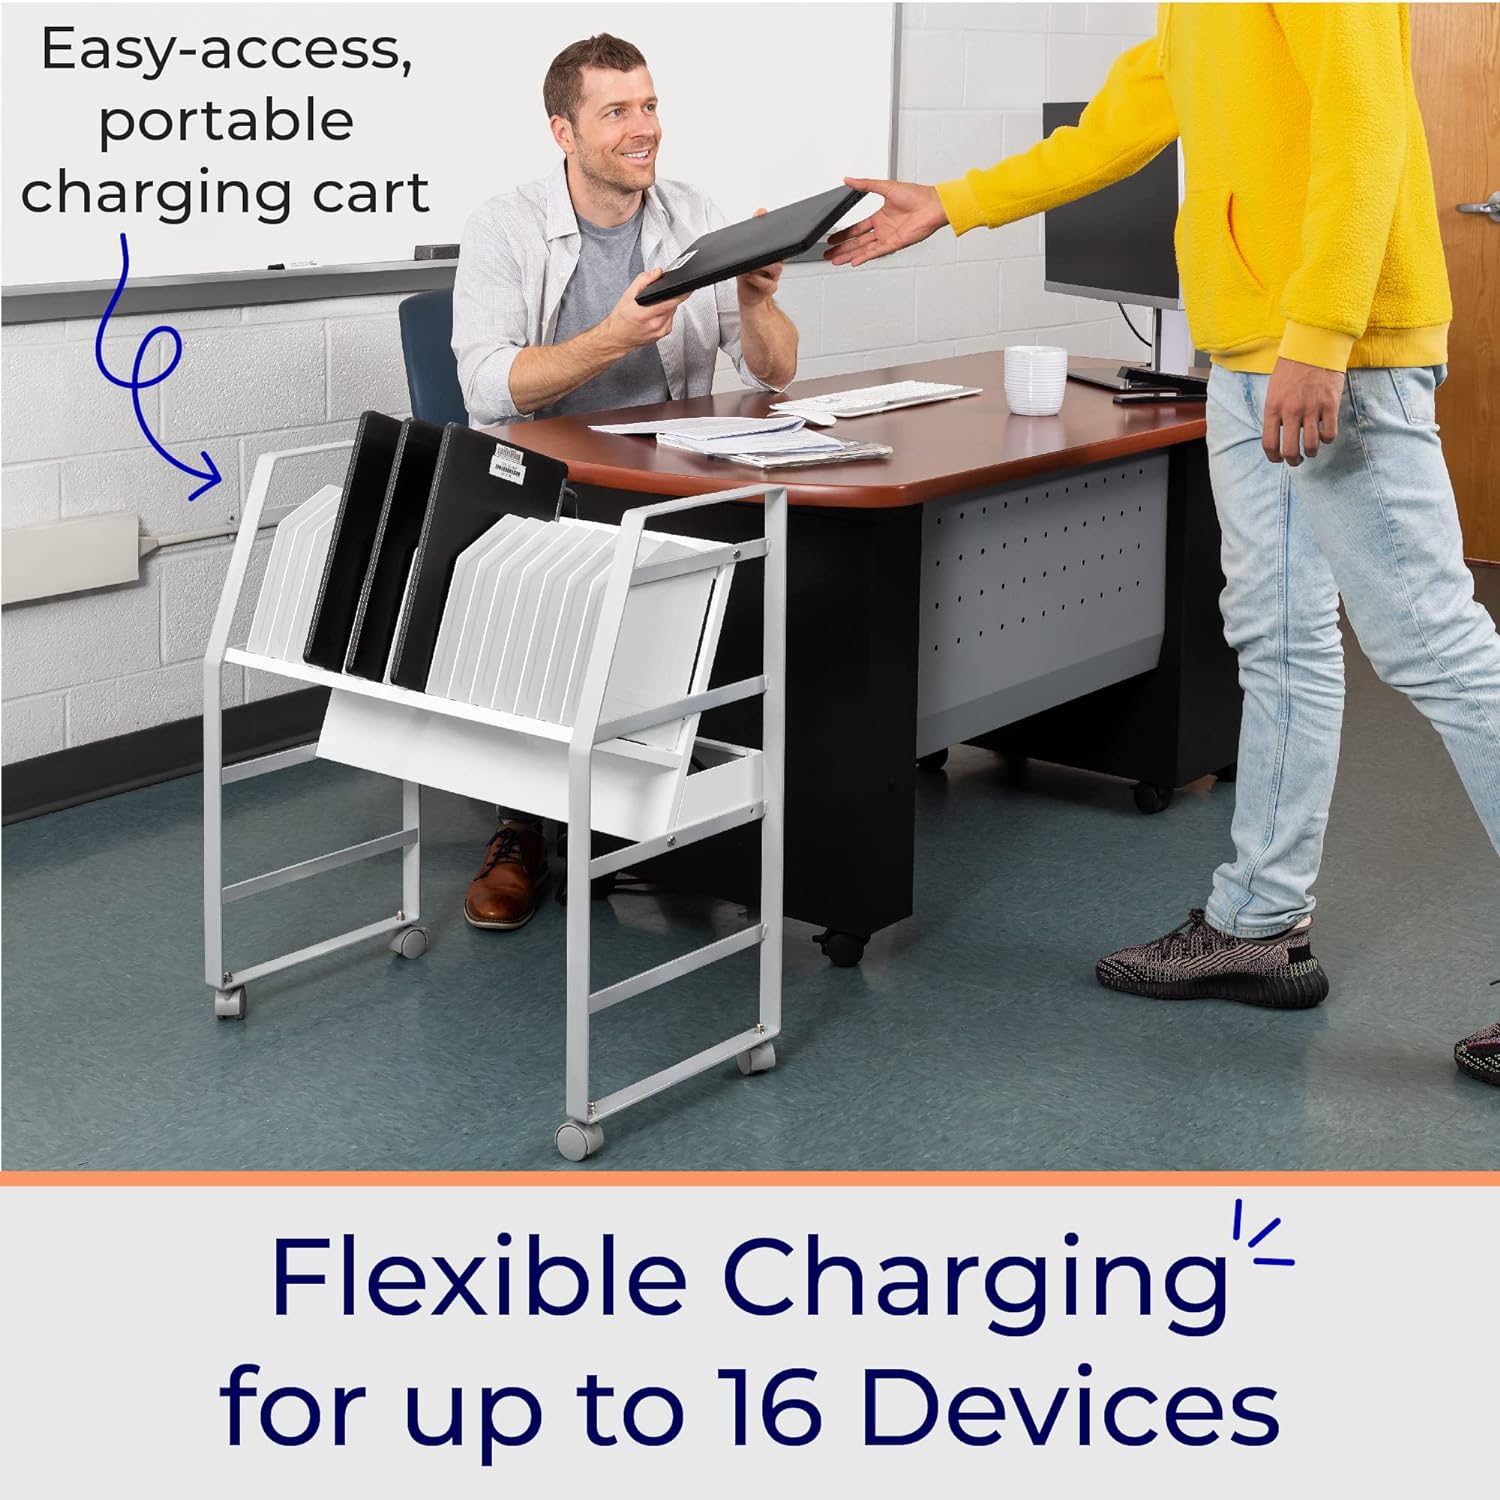 Portable 32-Device Mobile Charging Station | Rolling Open Storage Cart with Reversible Top Shelving | Tablets, Laptops, Chromebooks | UL Safety-Certified with Surge Protection